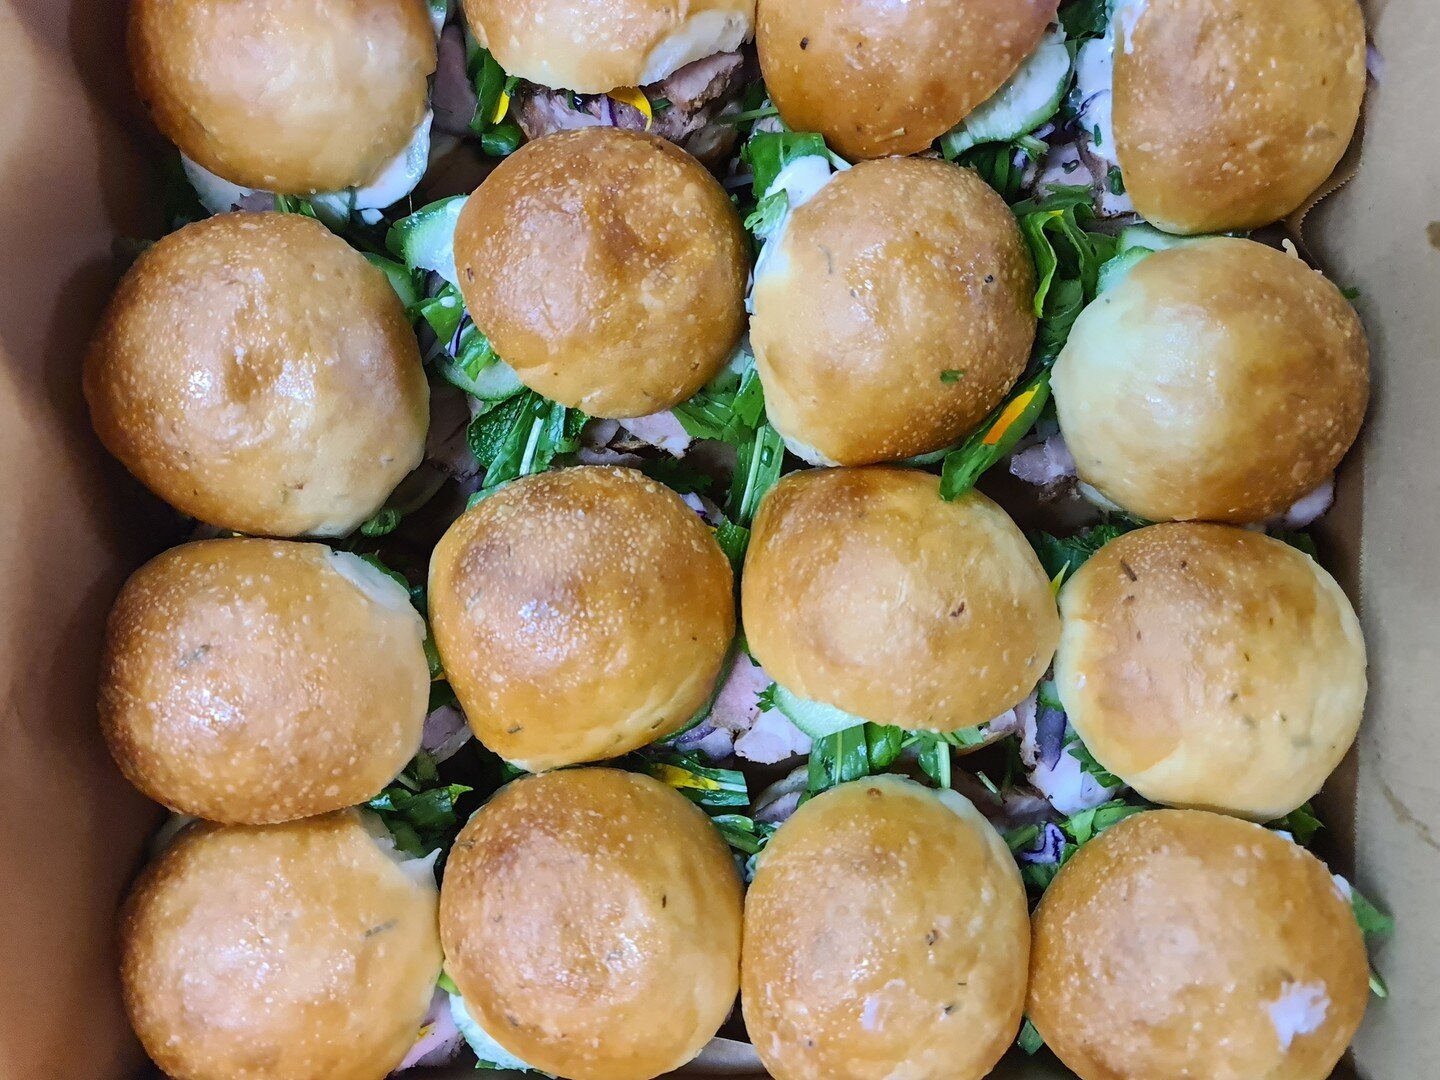 Hands up if you think Asian Pork Sliders are the best starter for catering an event? 🐖⁠
⁠
We have sent out the Riverstone Kitchen goods to a local business catering an event this evening. ⁠
⁠
Show us your yum with an emoji 👇️